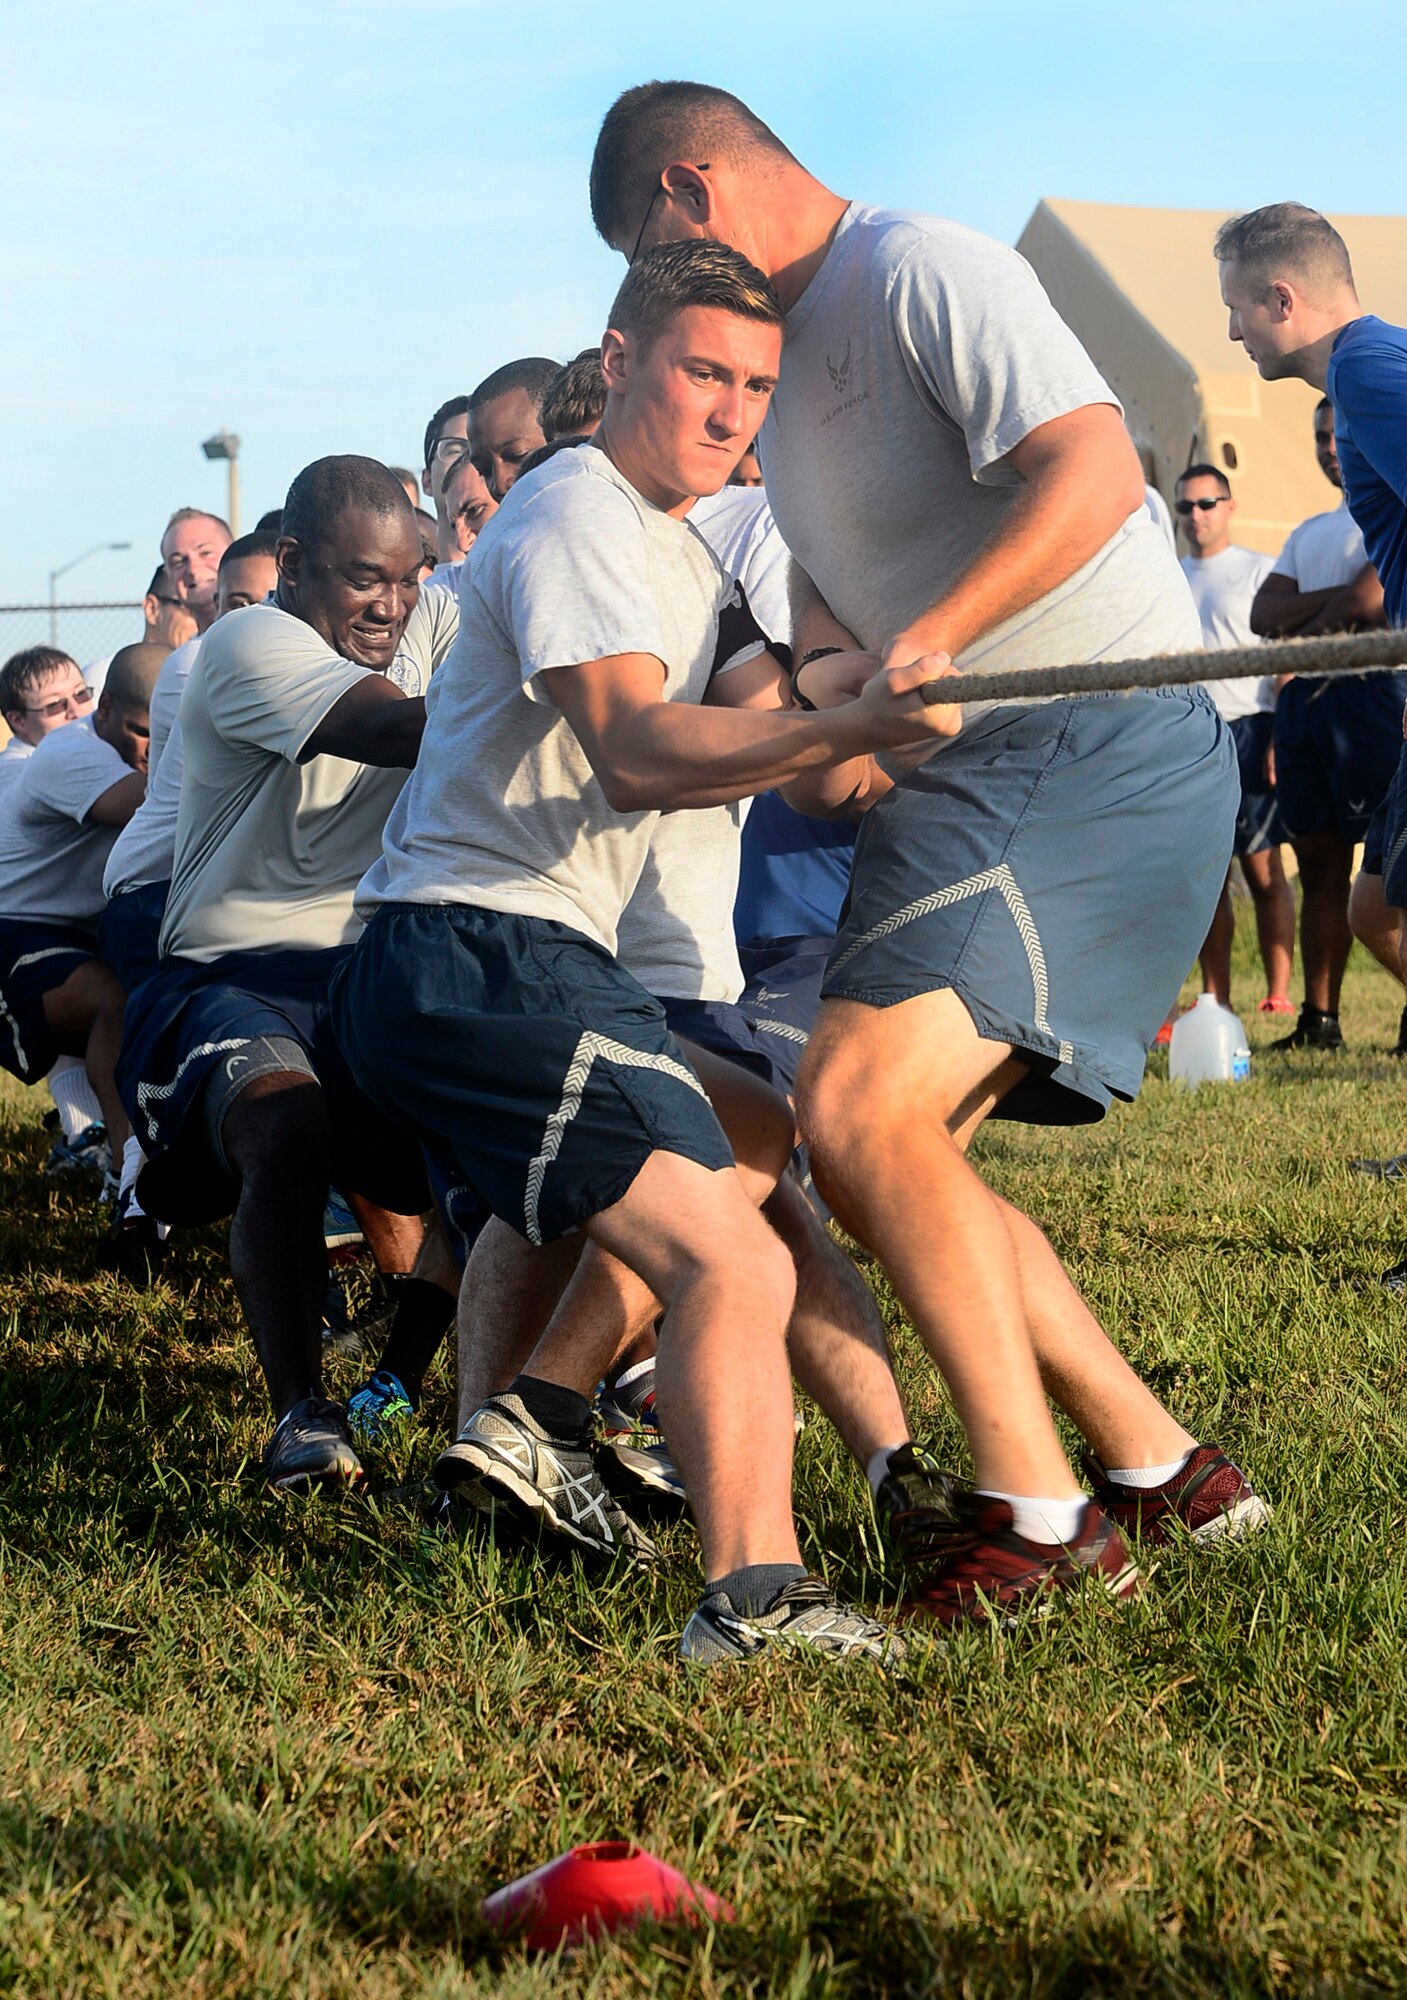 Members from the 6th Air Mobility Wing participate in Wingman Day at MacDill Air Force Base, Fla., Sept. 26, 2016. Wingman Day focused on the four pillars of Comprehensive Airman Fitness, which includes physical, mental, spiritual, and social pillars of health. (U.S. Air Force photo by Senior Airman Tori Schultz)